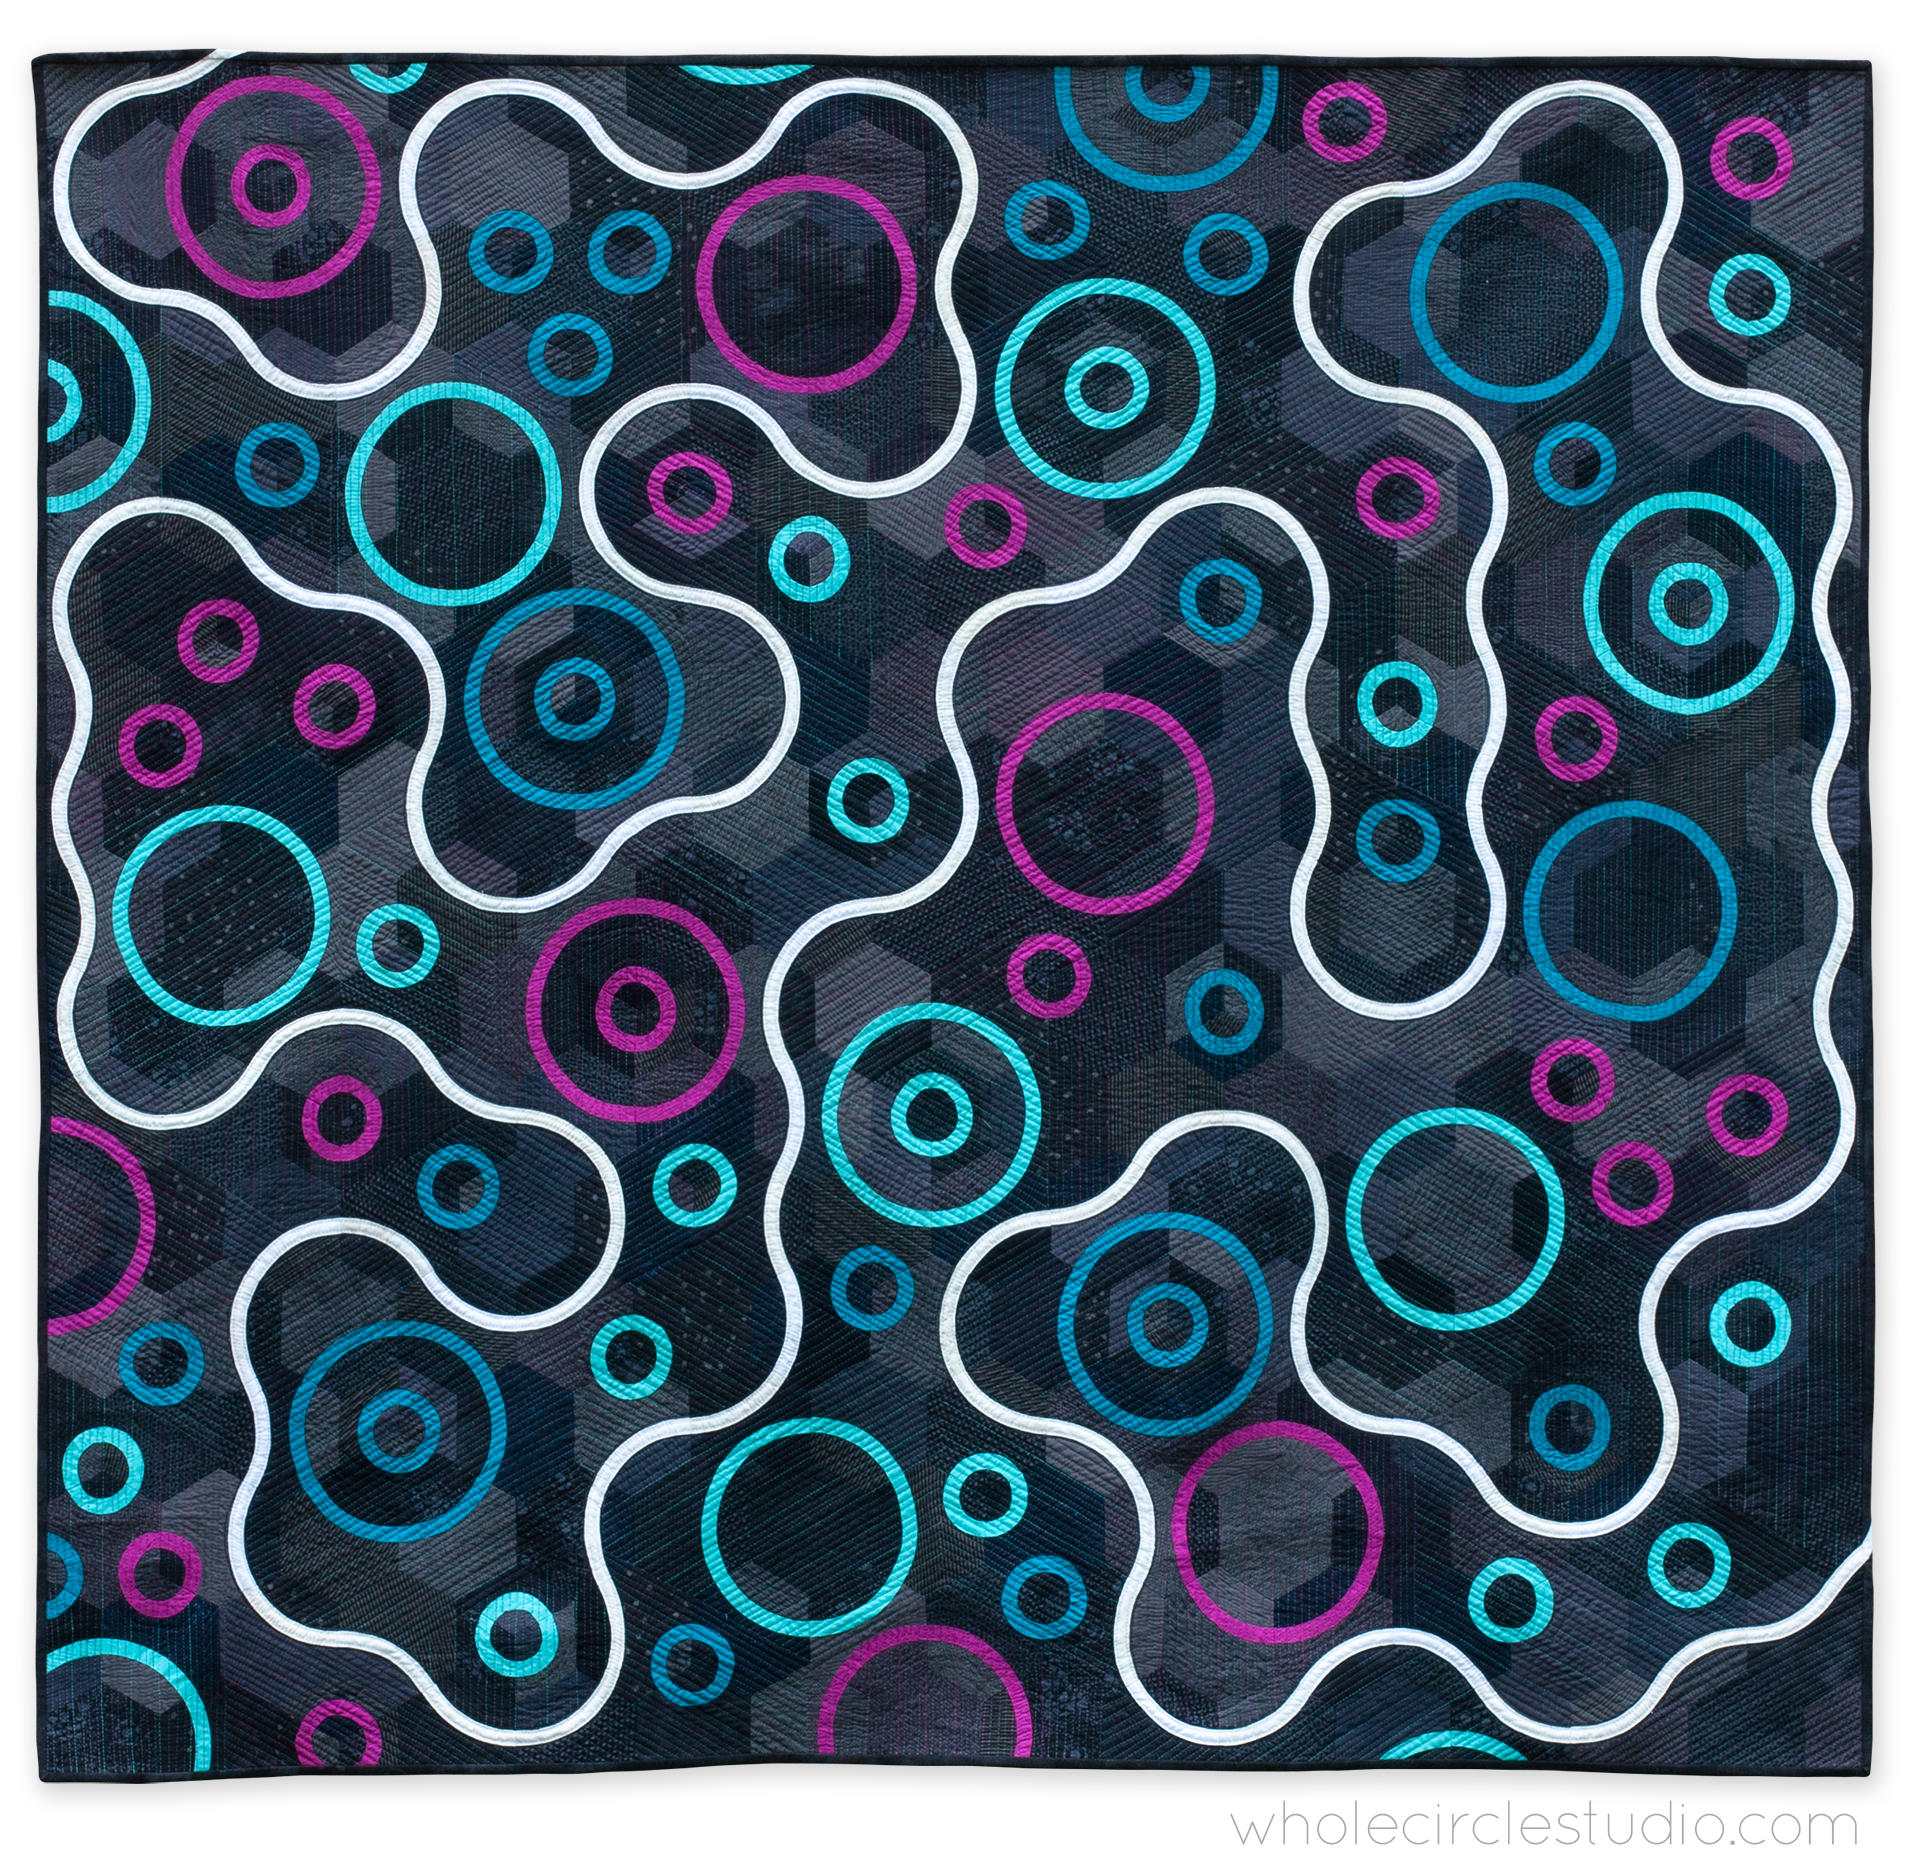 densely quilted art piece. Dark background with magenta, aqua, and white curved lines